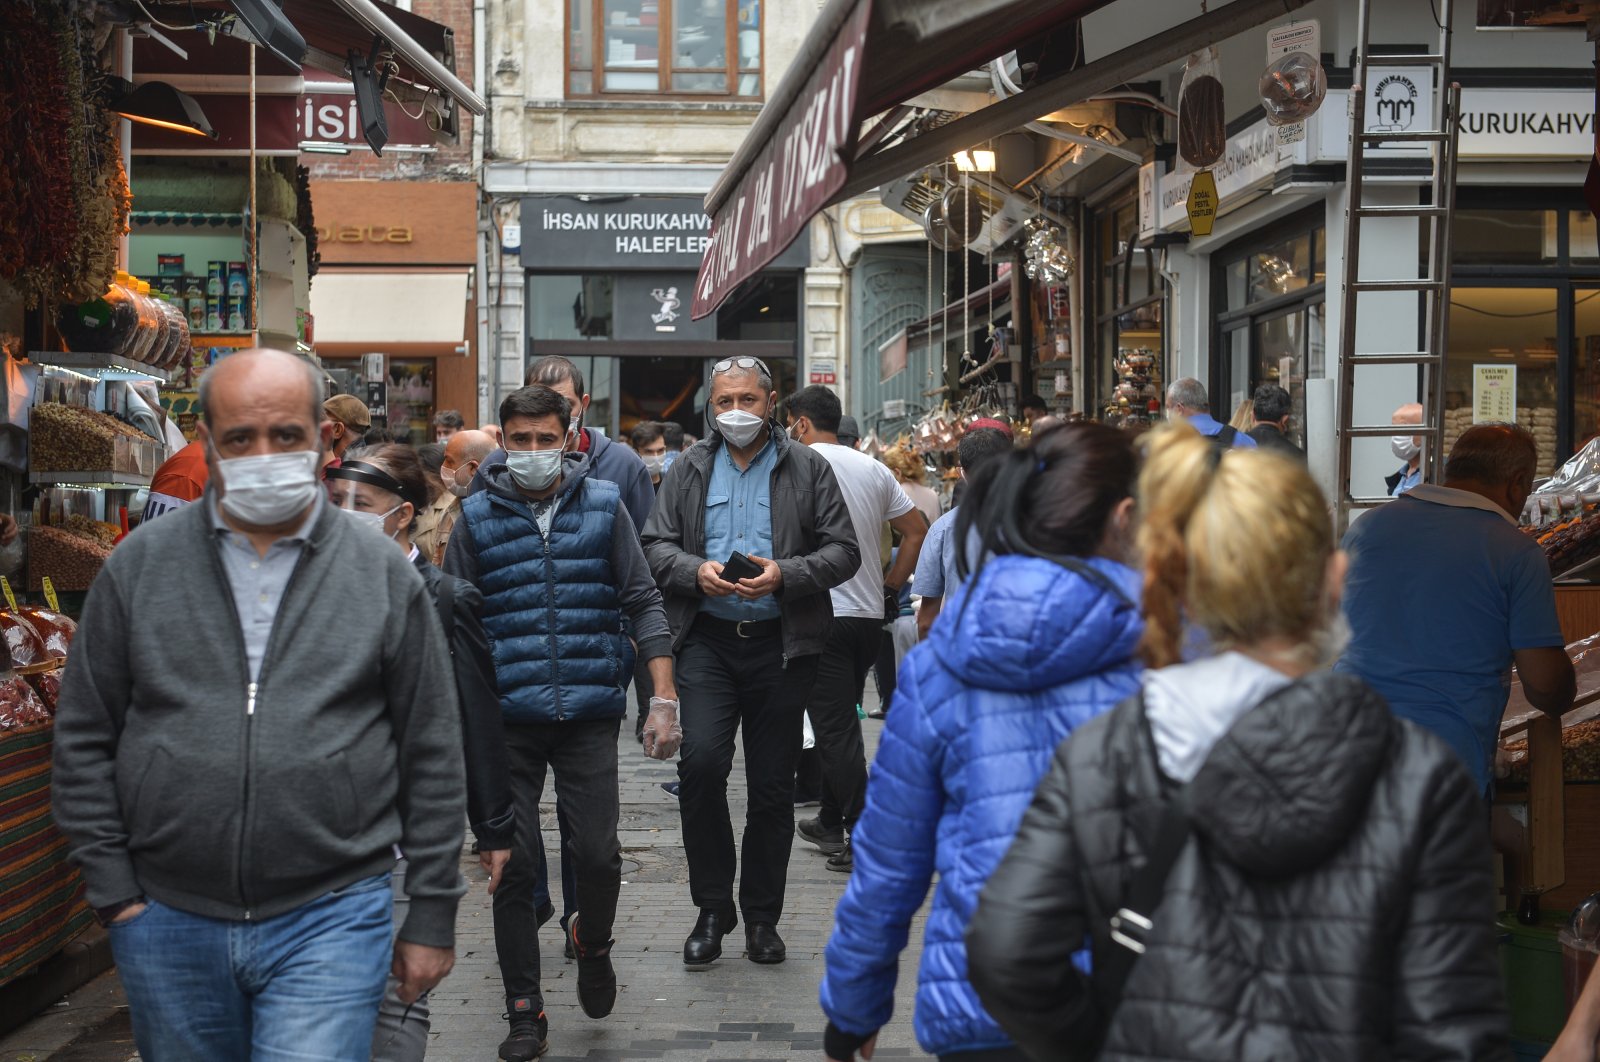 People wearing protective masks walk in a marketplace, in Istanbul, Turkey, June 3, 2020. (DHA Photo)